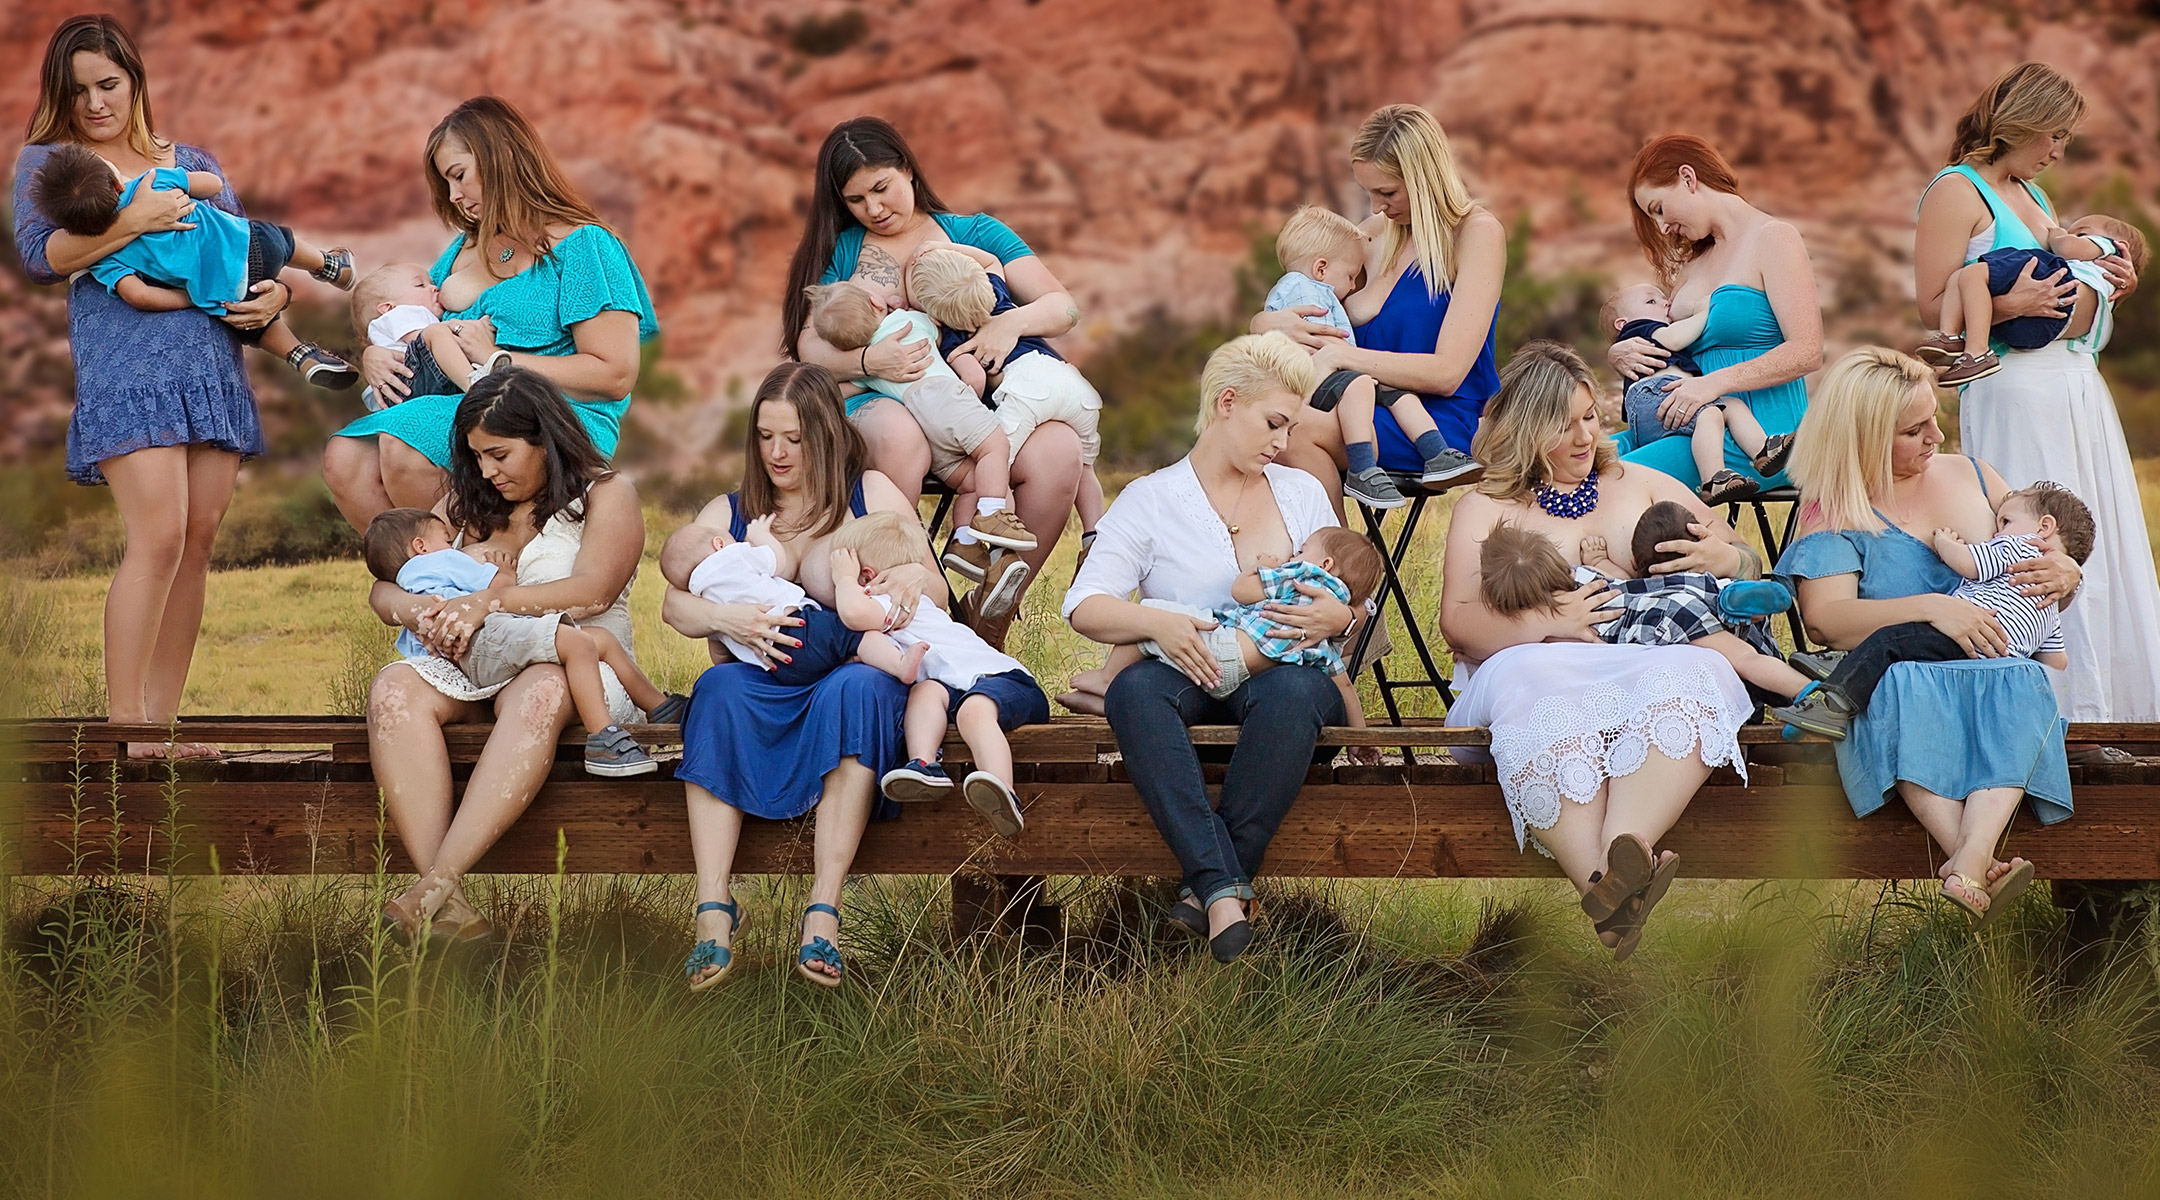 30 Empowering Breastfeeding Photos picture pic